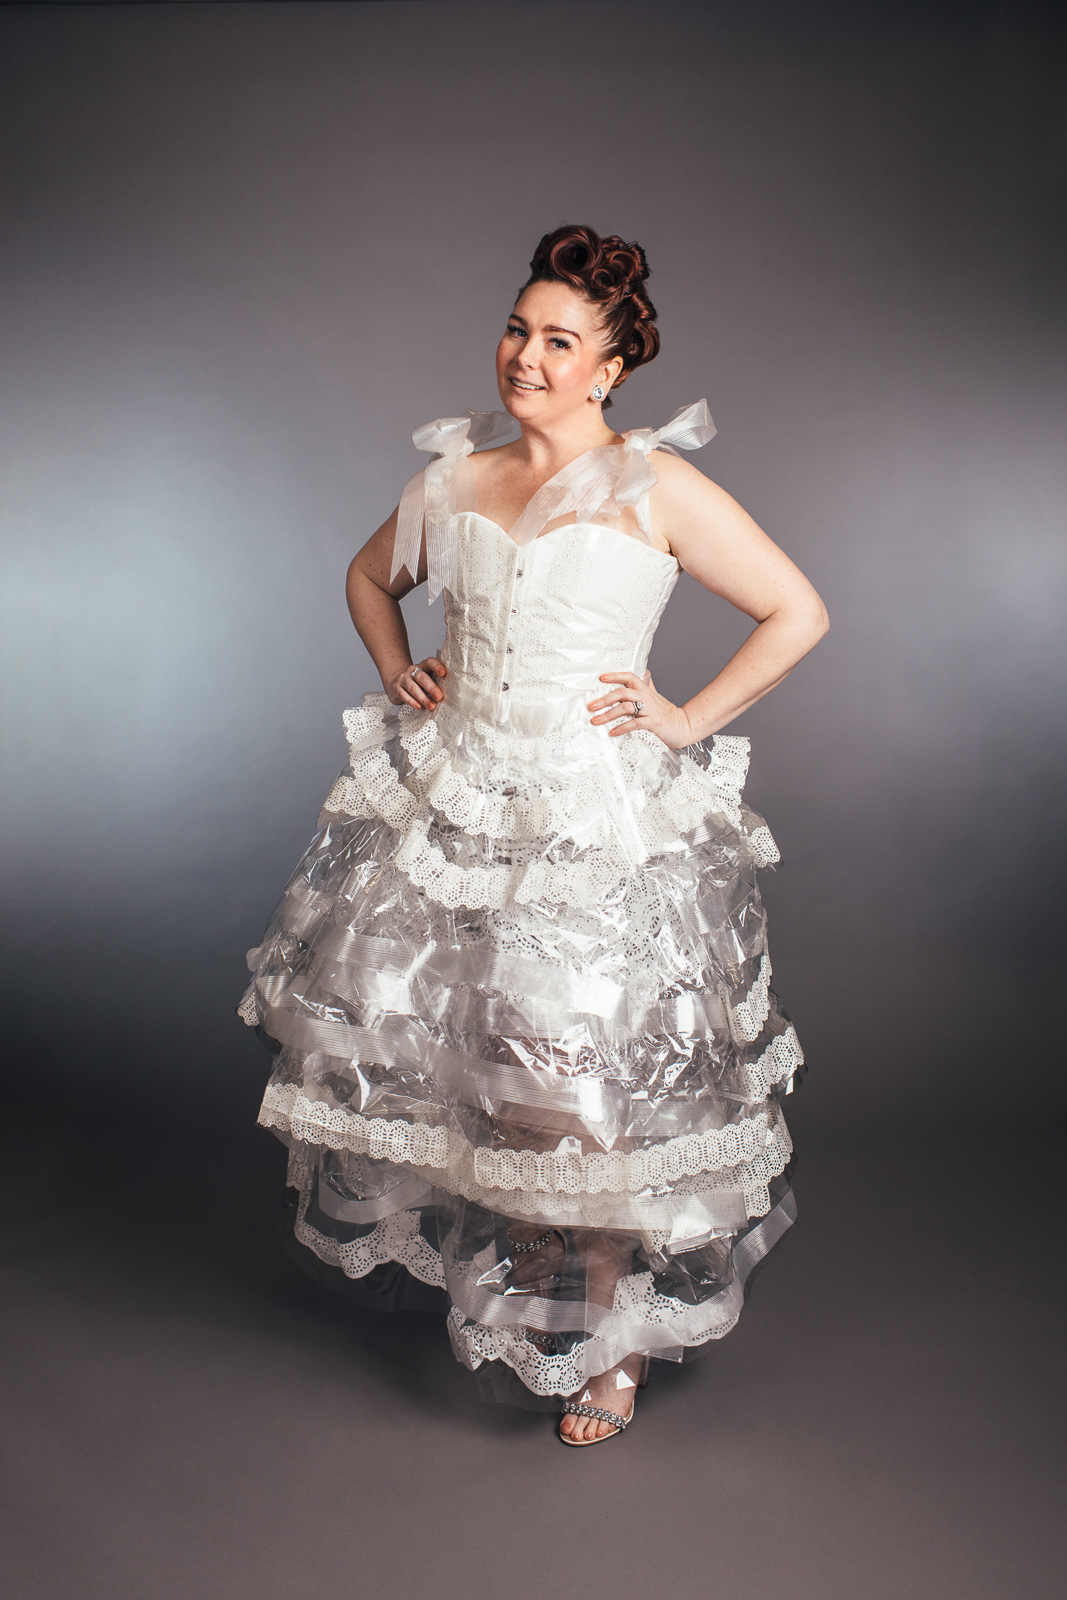 2023 Upcycled Fashion Show portrait by portrait artist, Kerry Struble, of Birch Blaze Studios located in Wakefield, NH. Stunning ballgown/formal wear handmade from used Amazon packaging!!